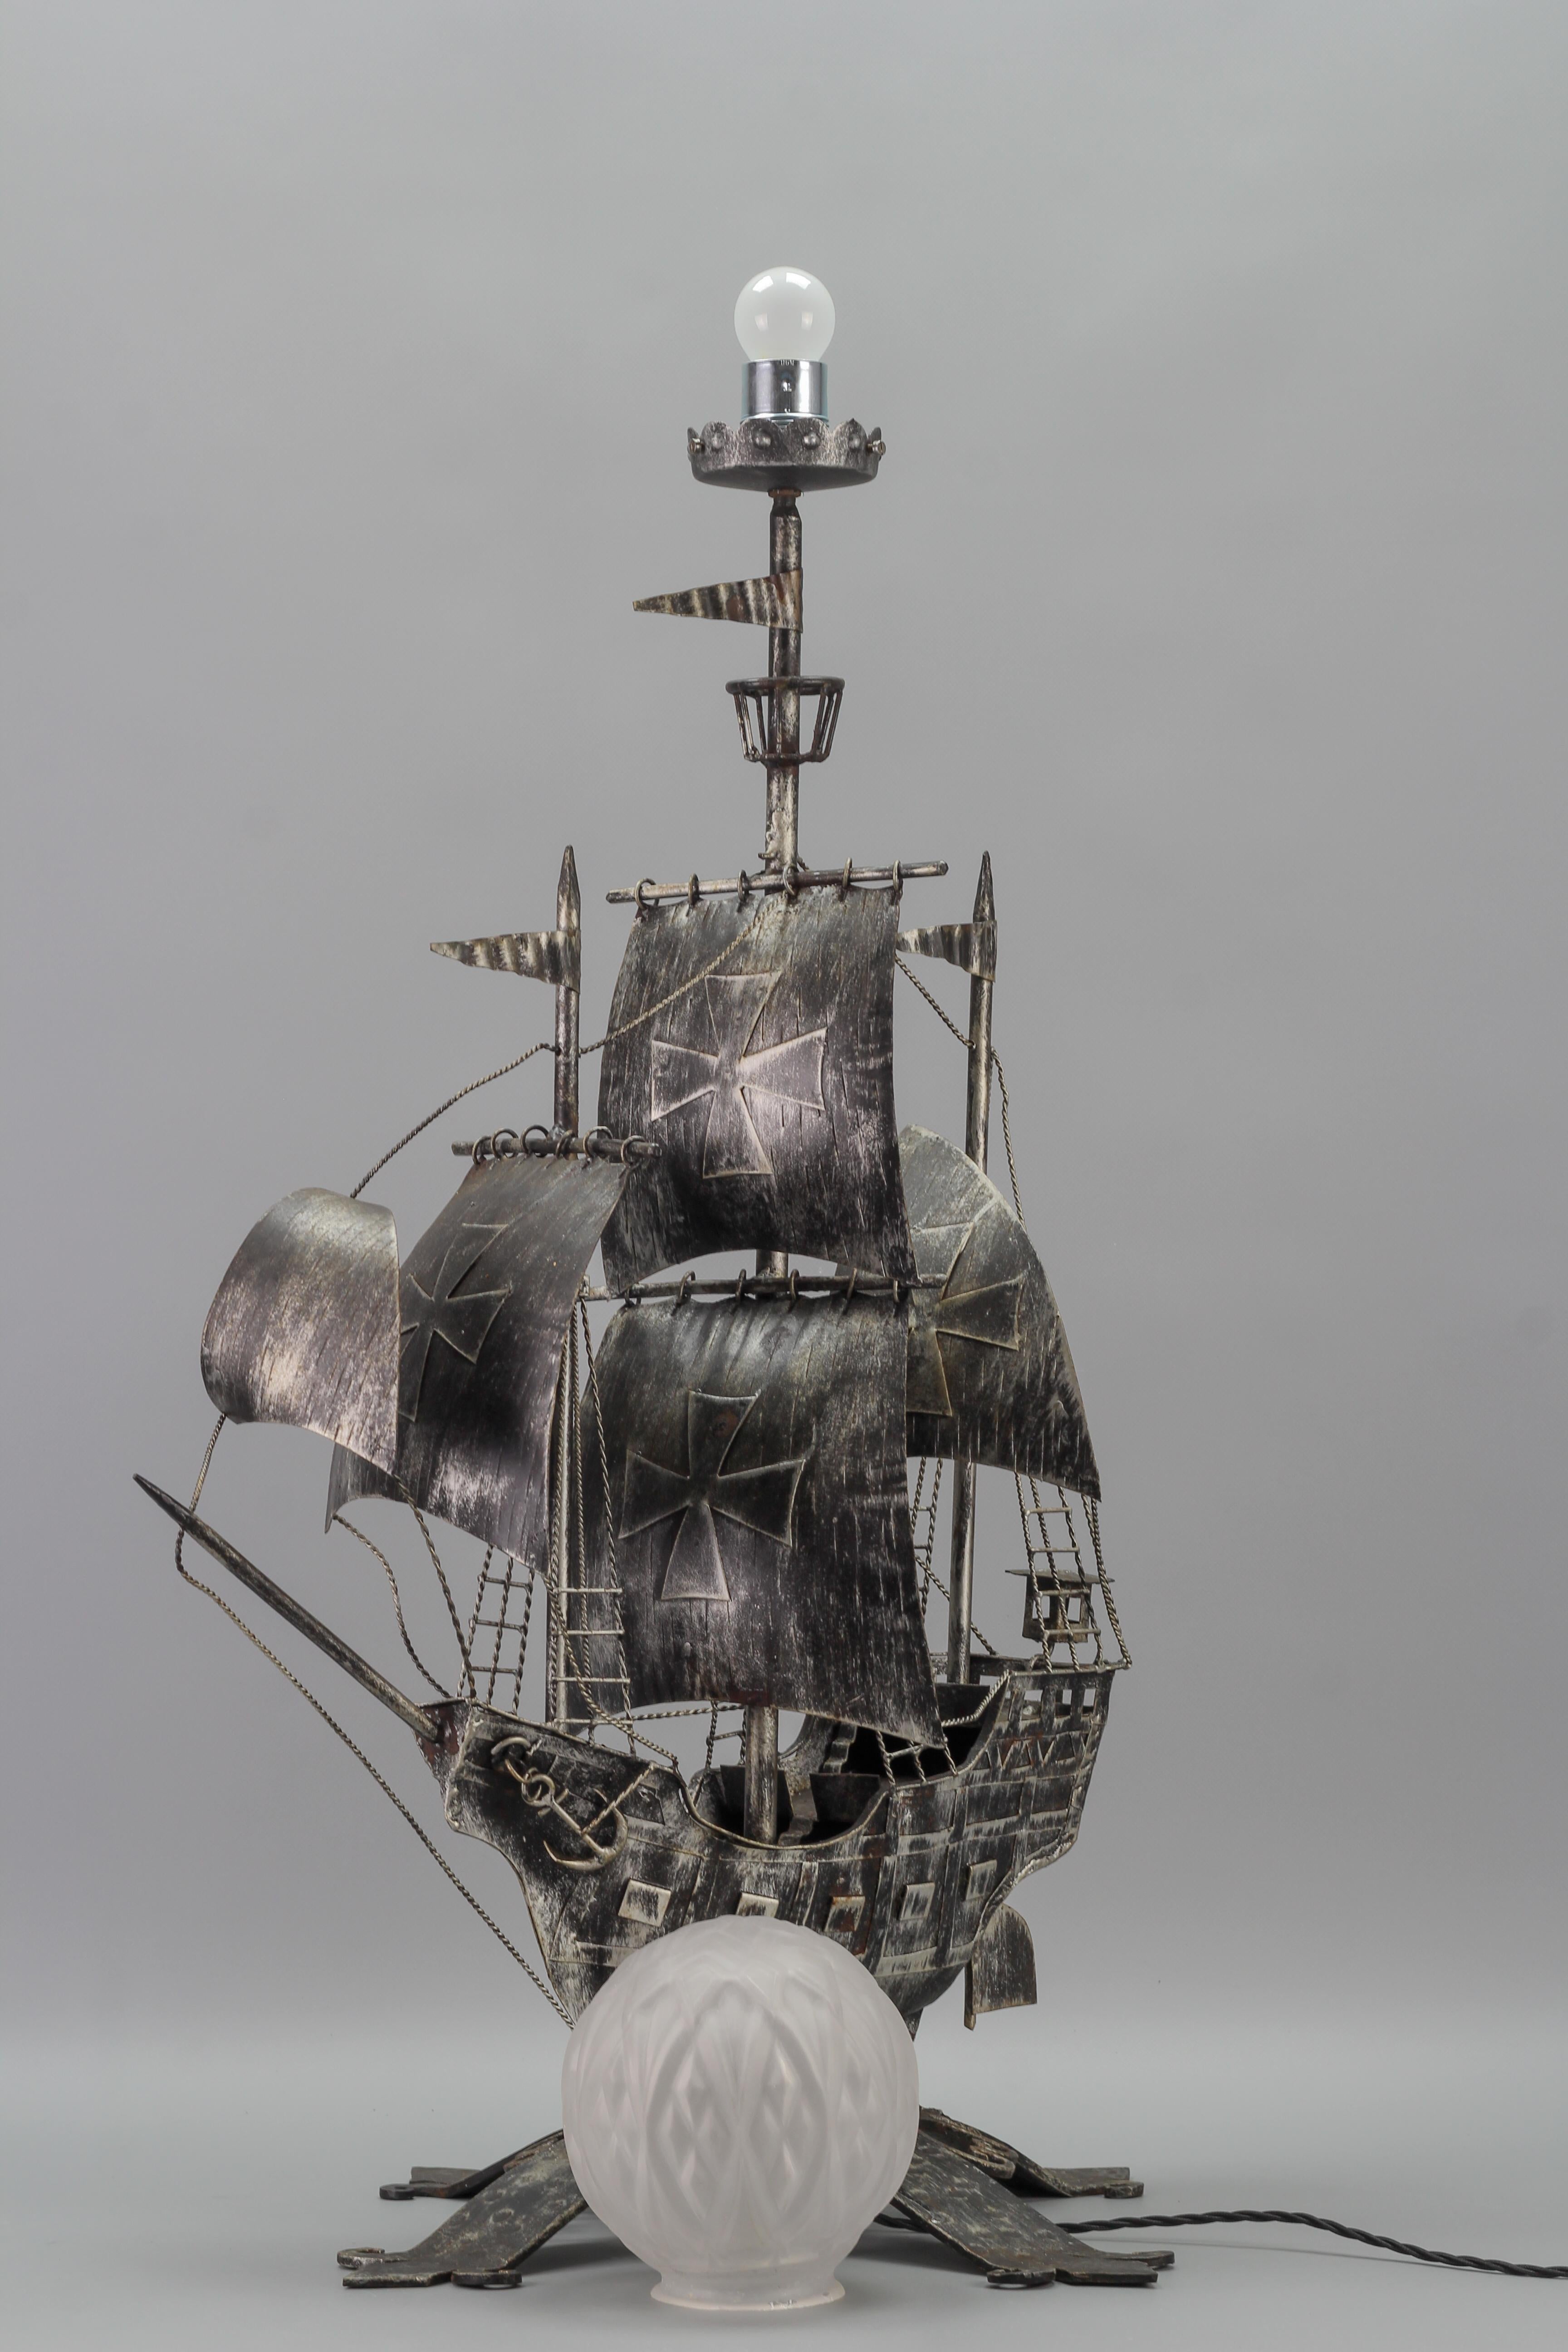 Wrought Iron and Glass Spanish Galleon Sailing Ship Shaped Floor Lamp, 1950s For Sale 11